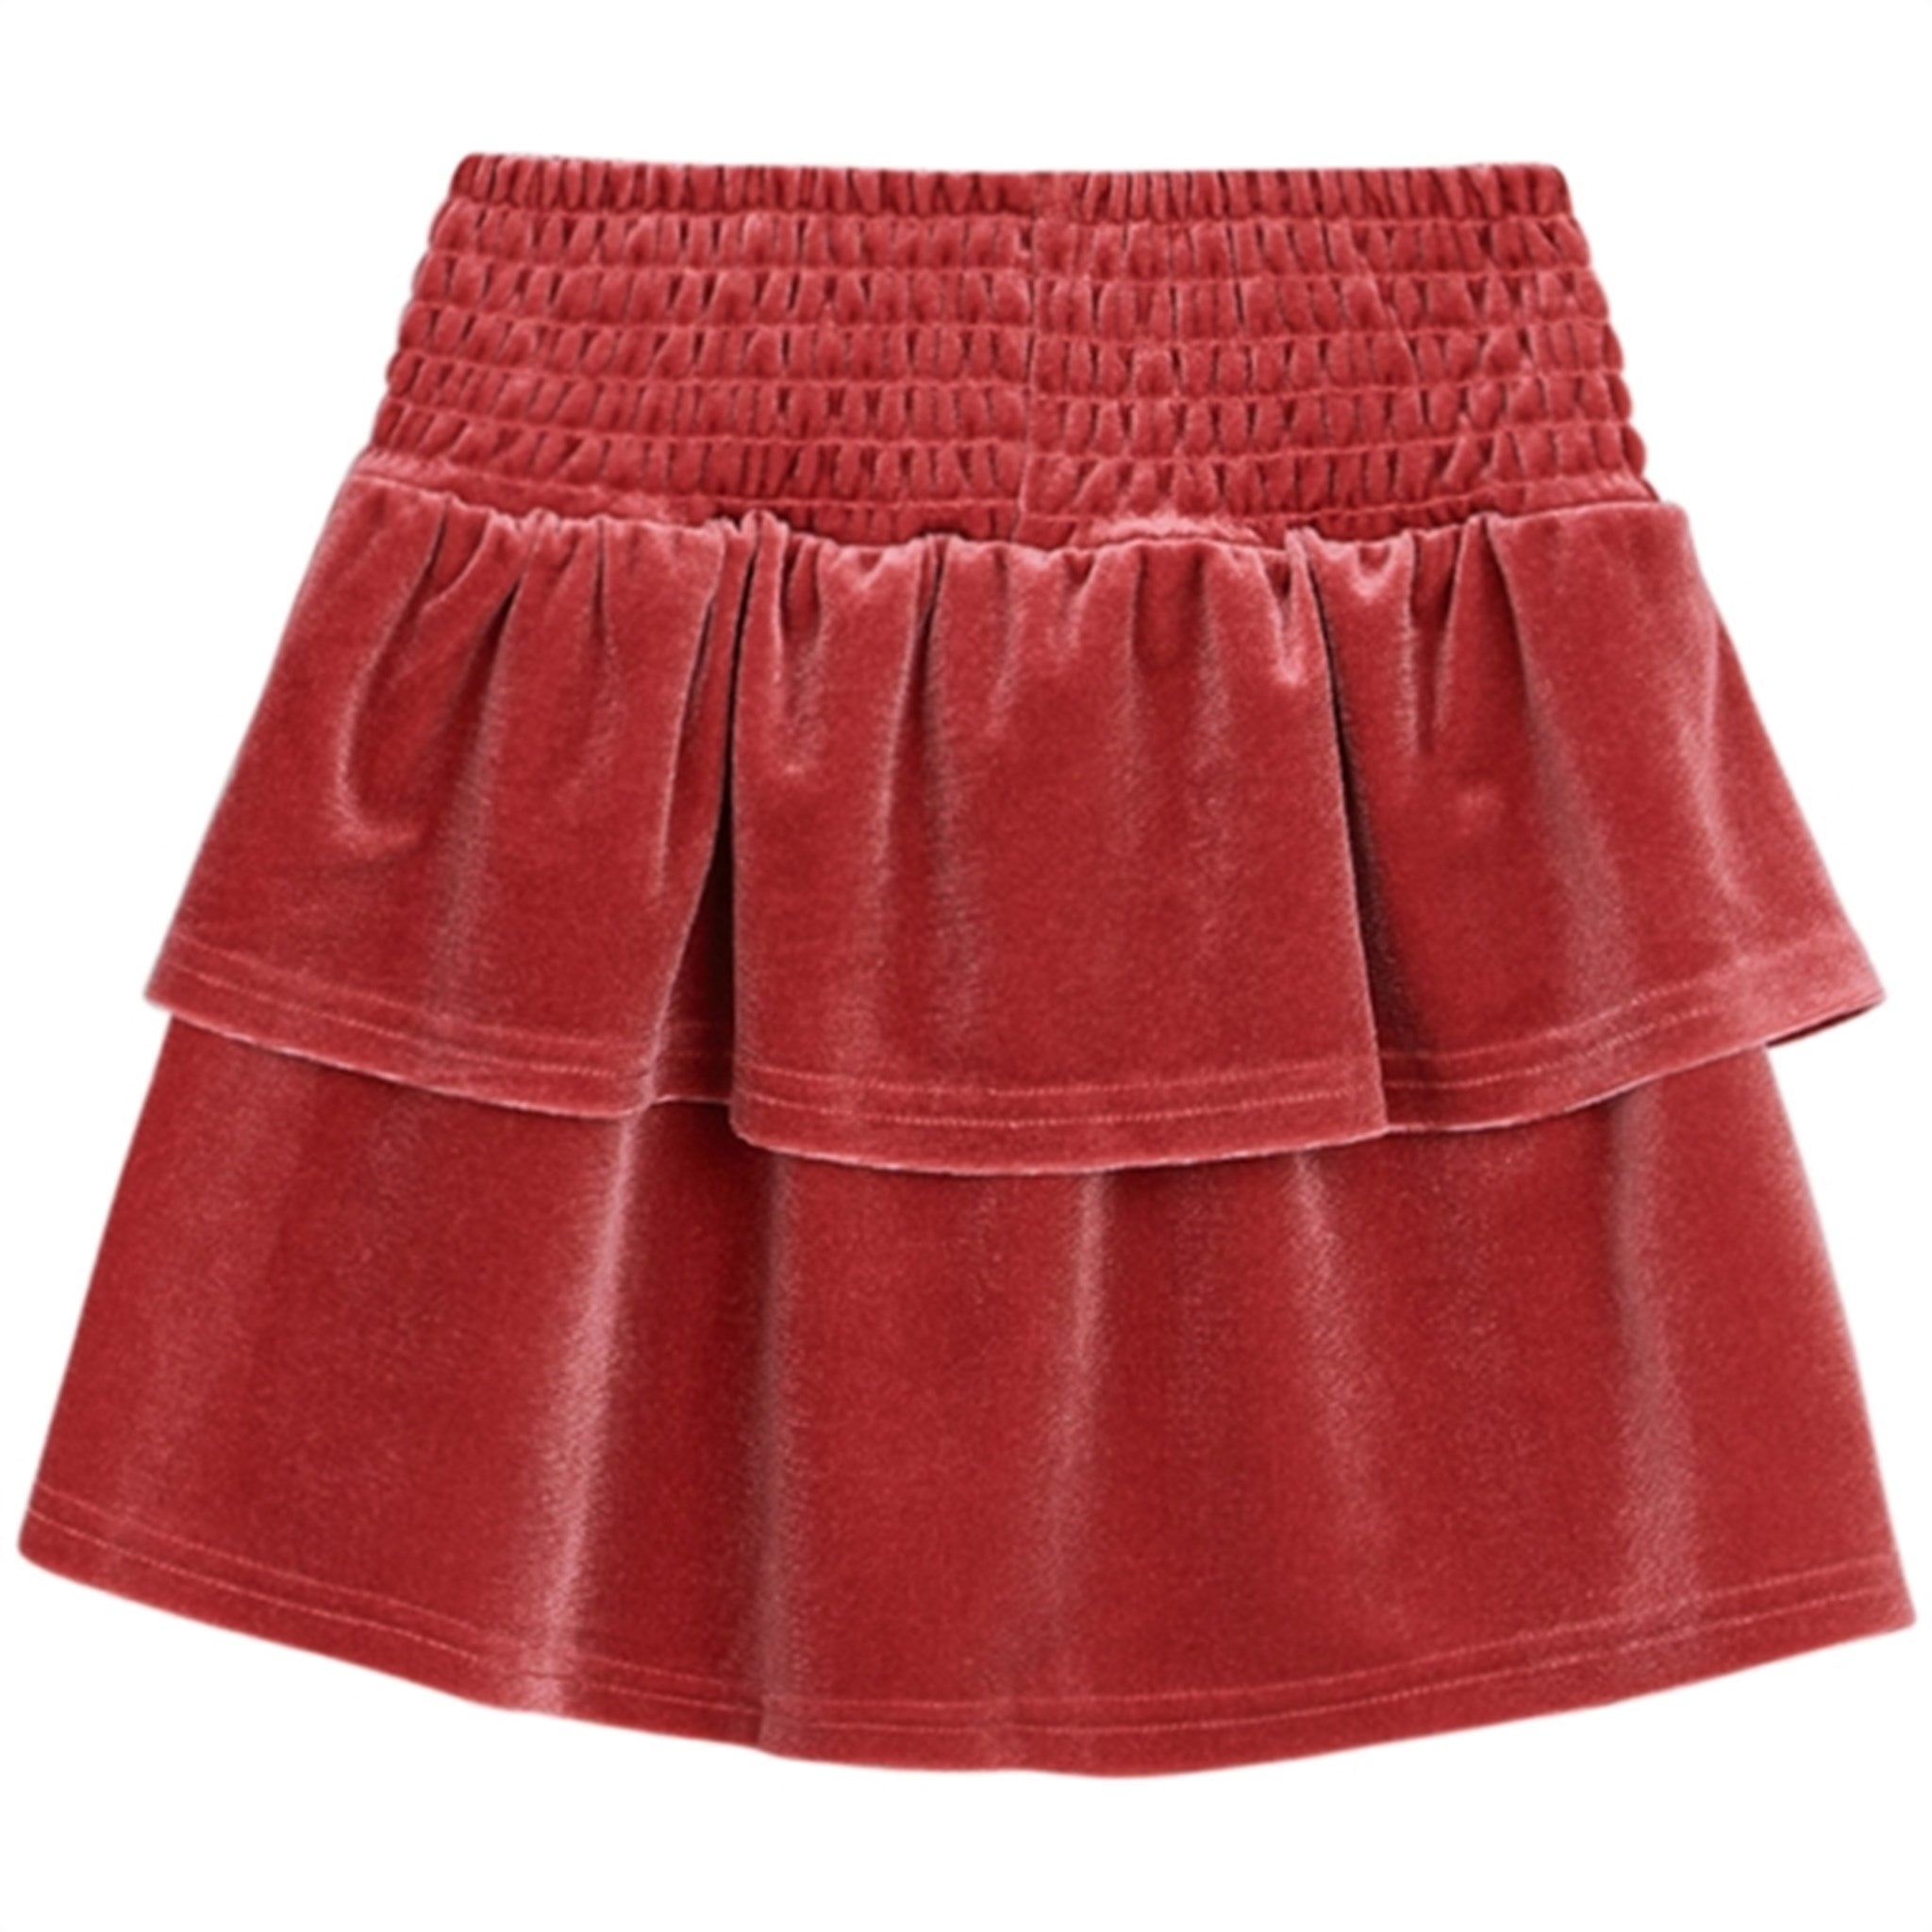 Hust & Claire Mini Teaberry Niena Skirt 2